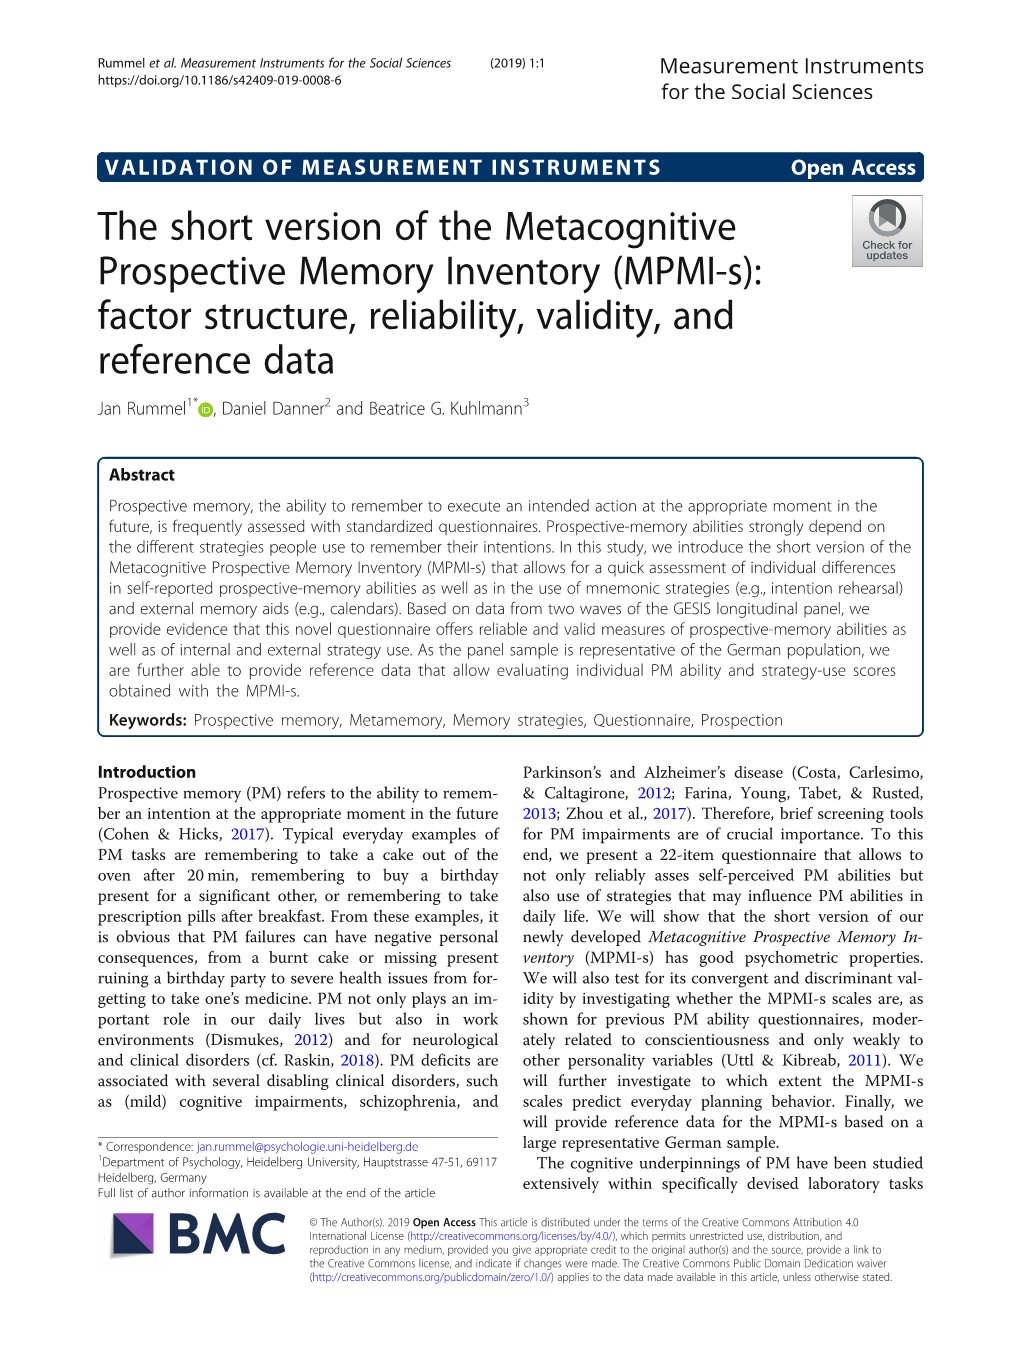 The Short Version of the Metacognitive Prospective Memory Inventory